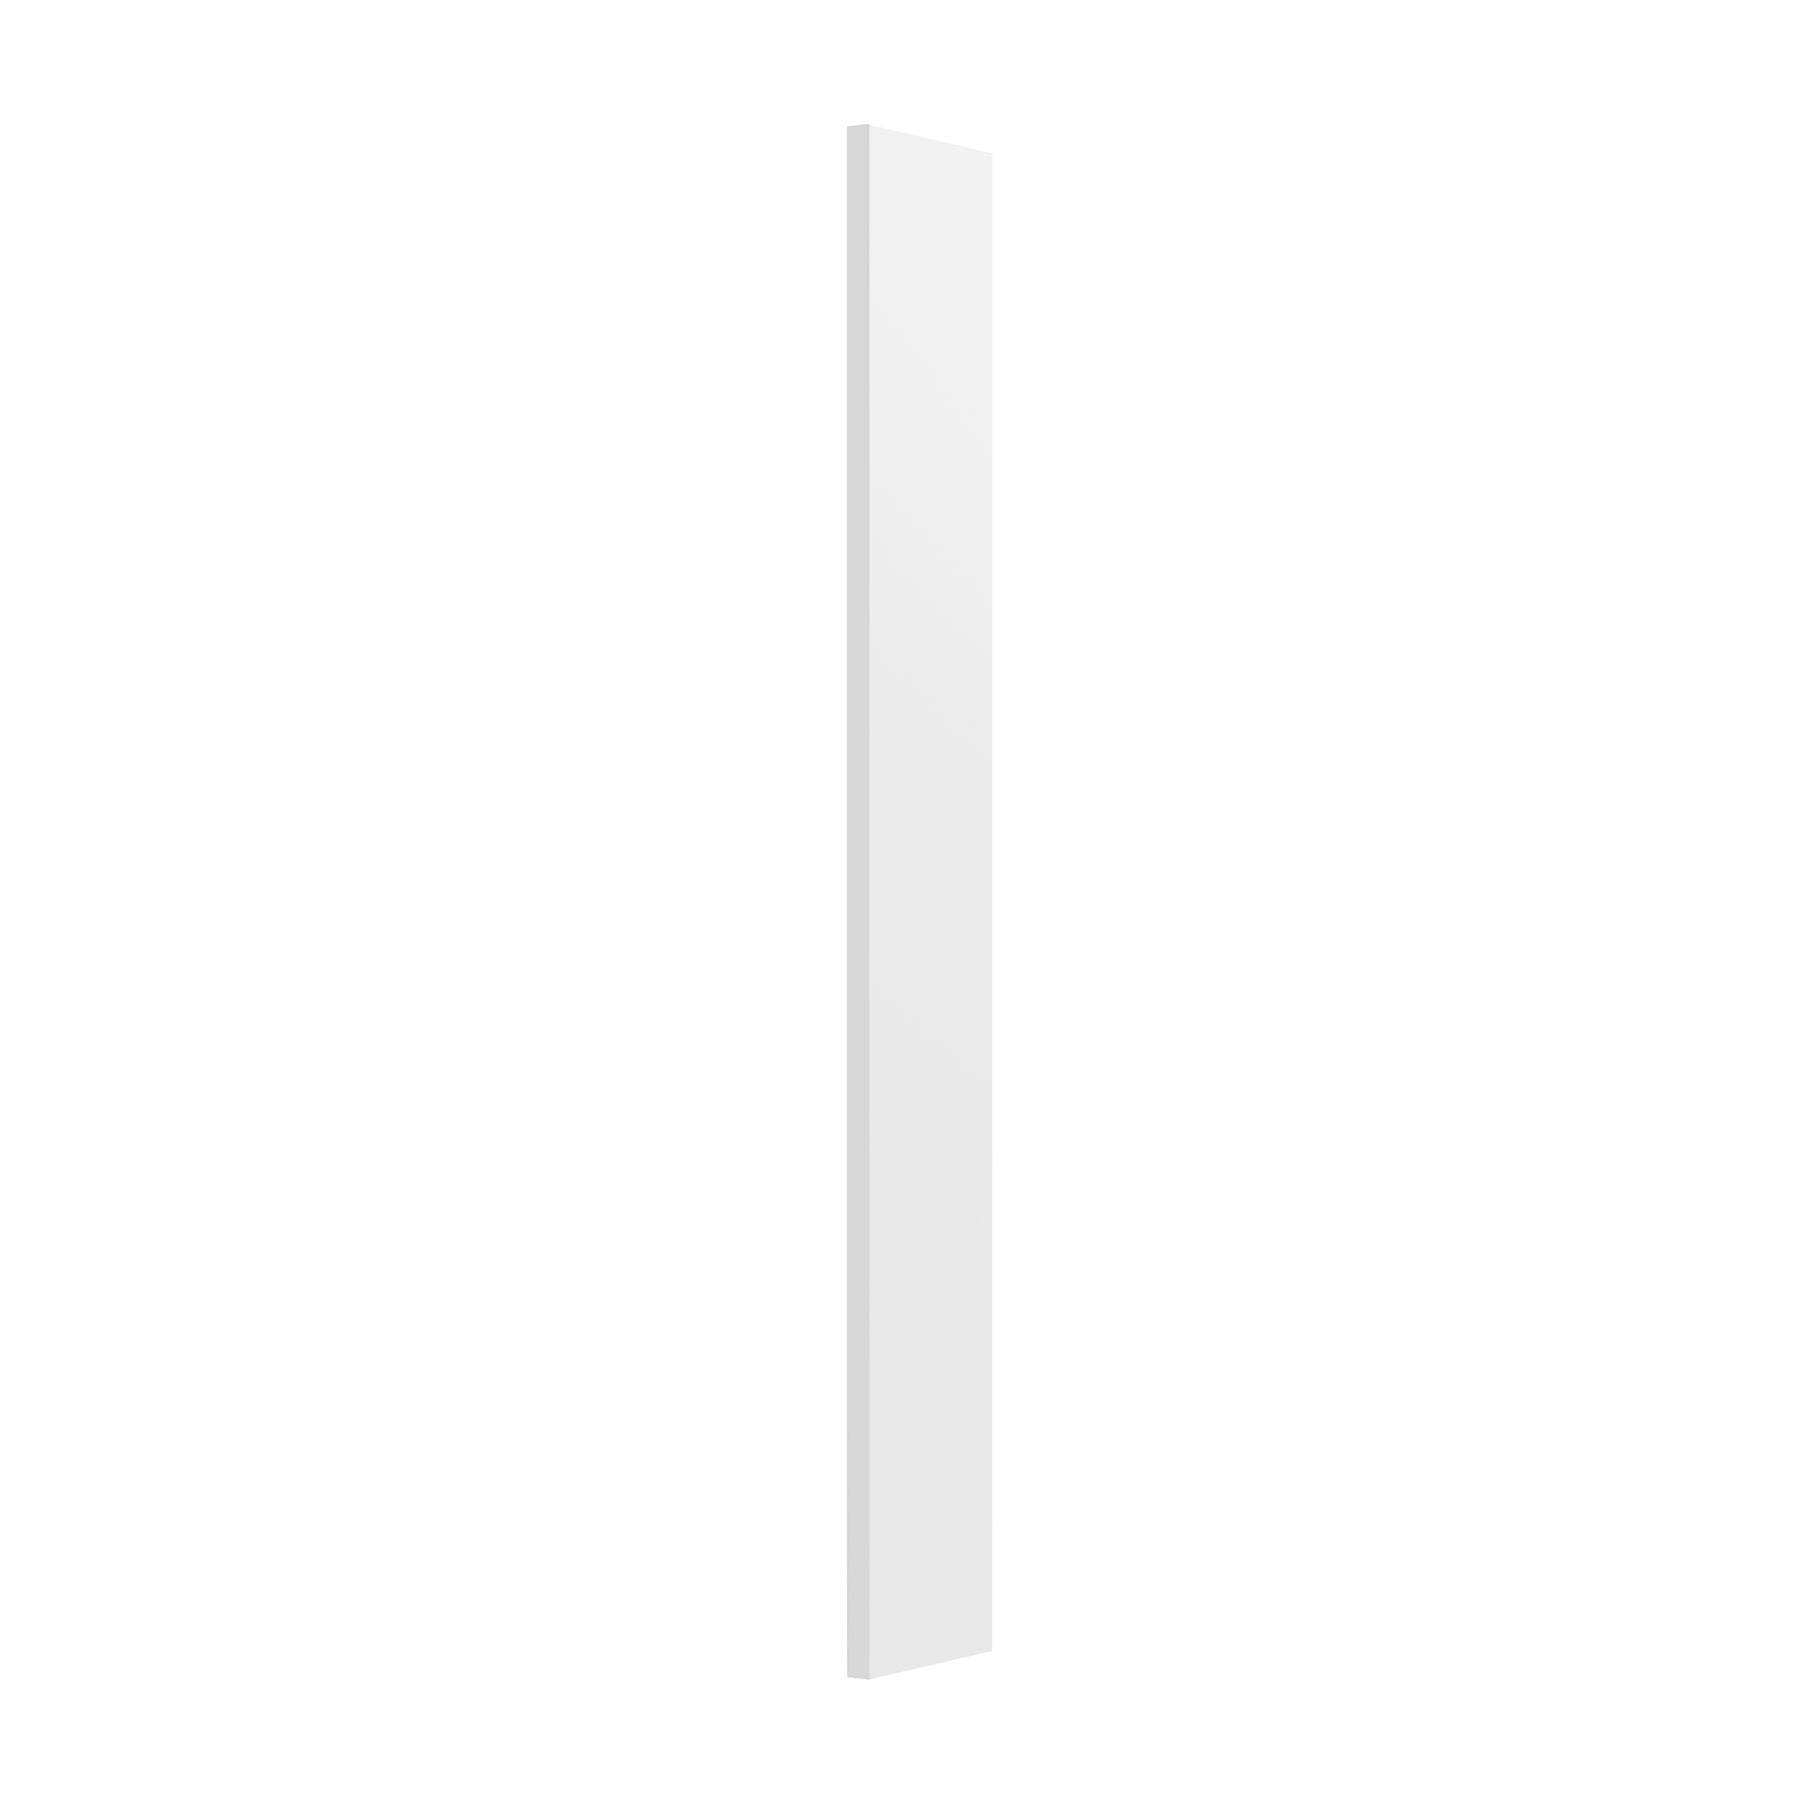 30 Inch High Wall Filler For Cabinet - Luxor White Shaker - Ready To Assemble, 3"W x 30"H x 0.75"D